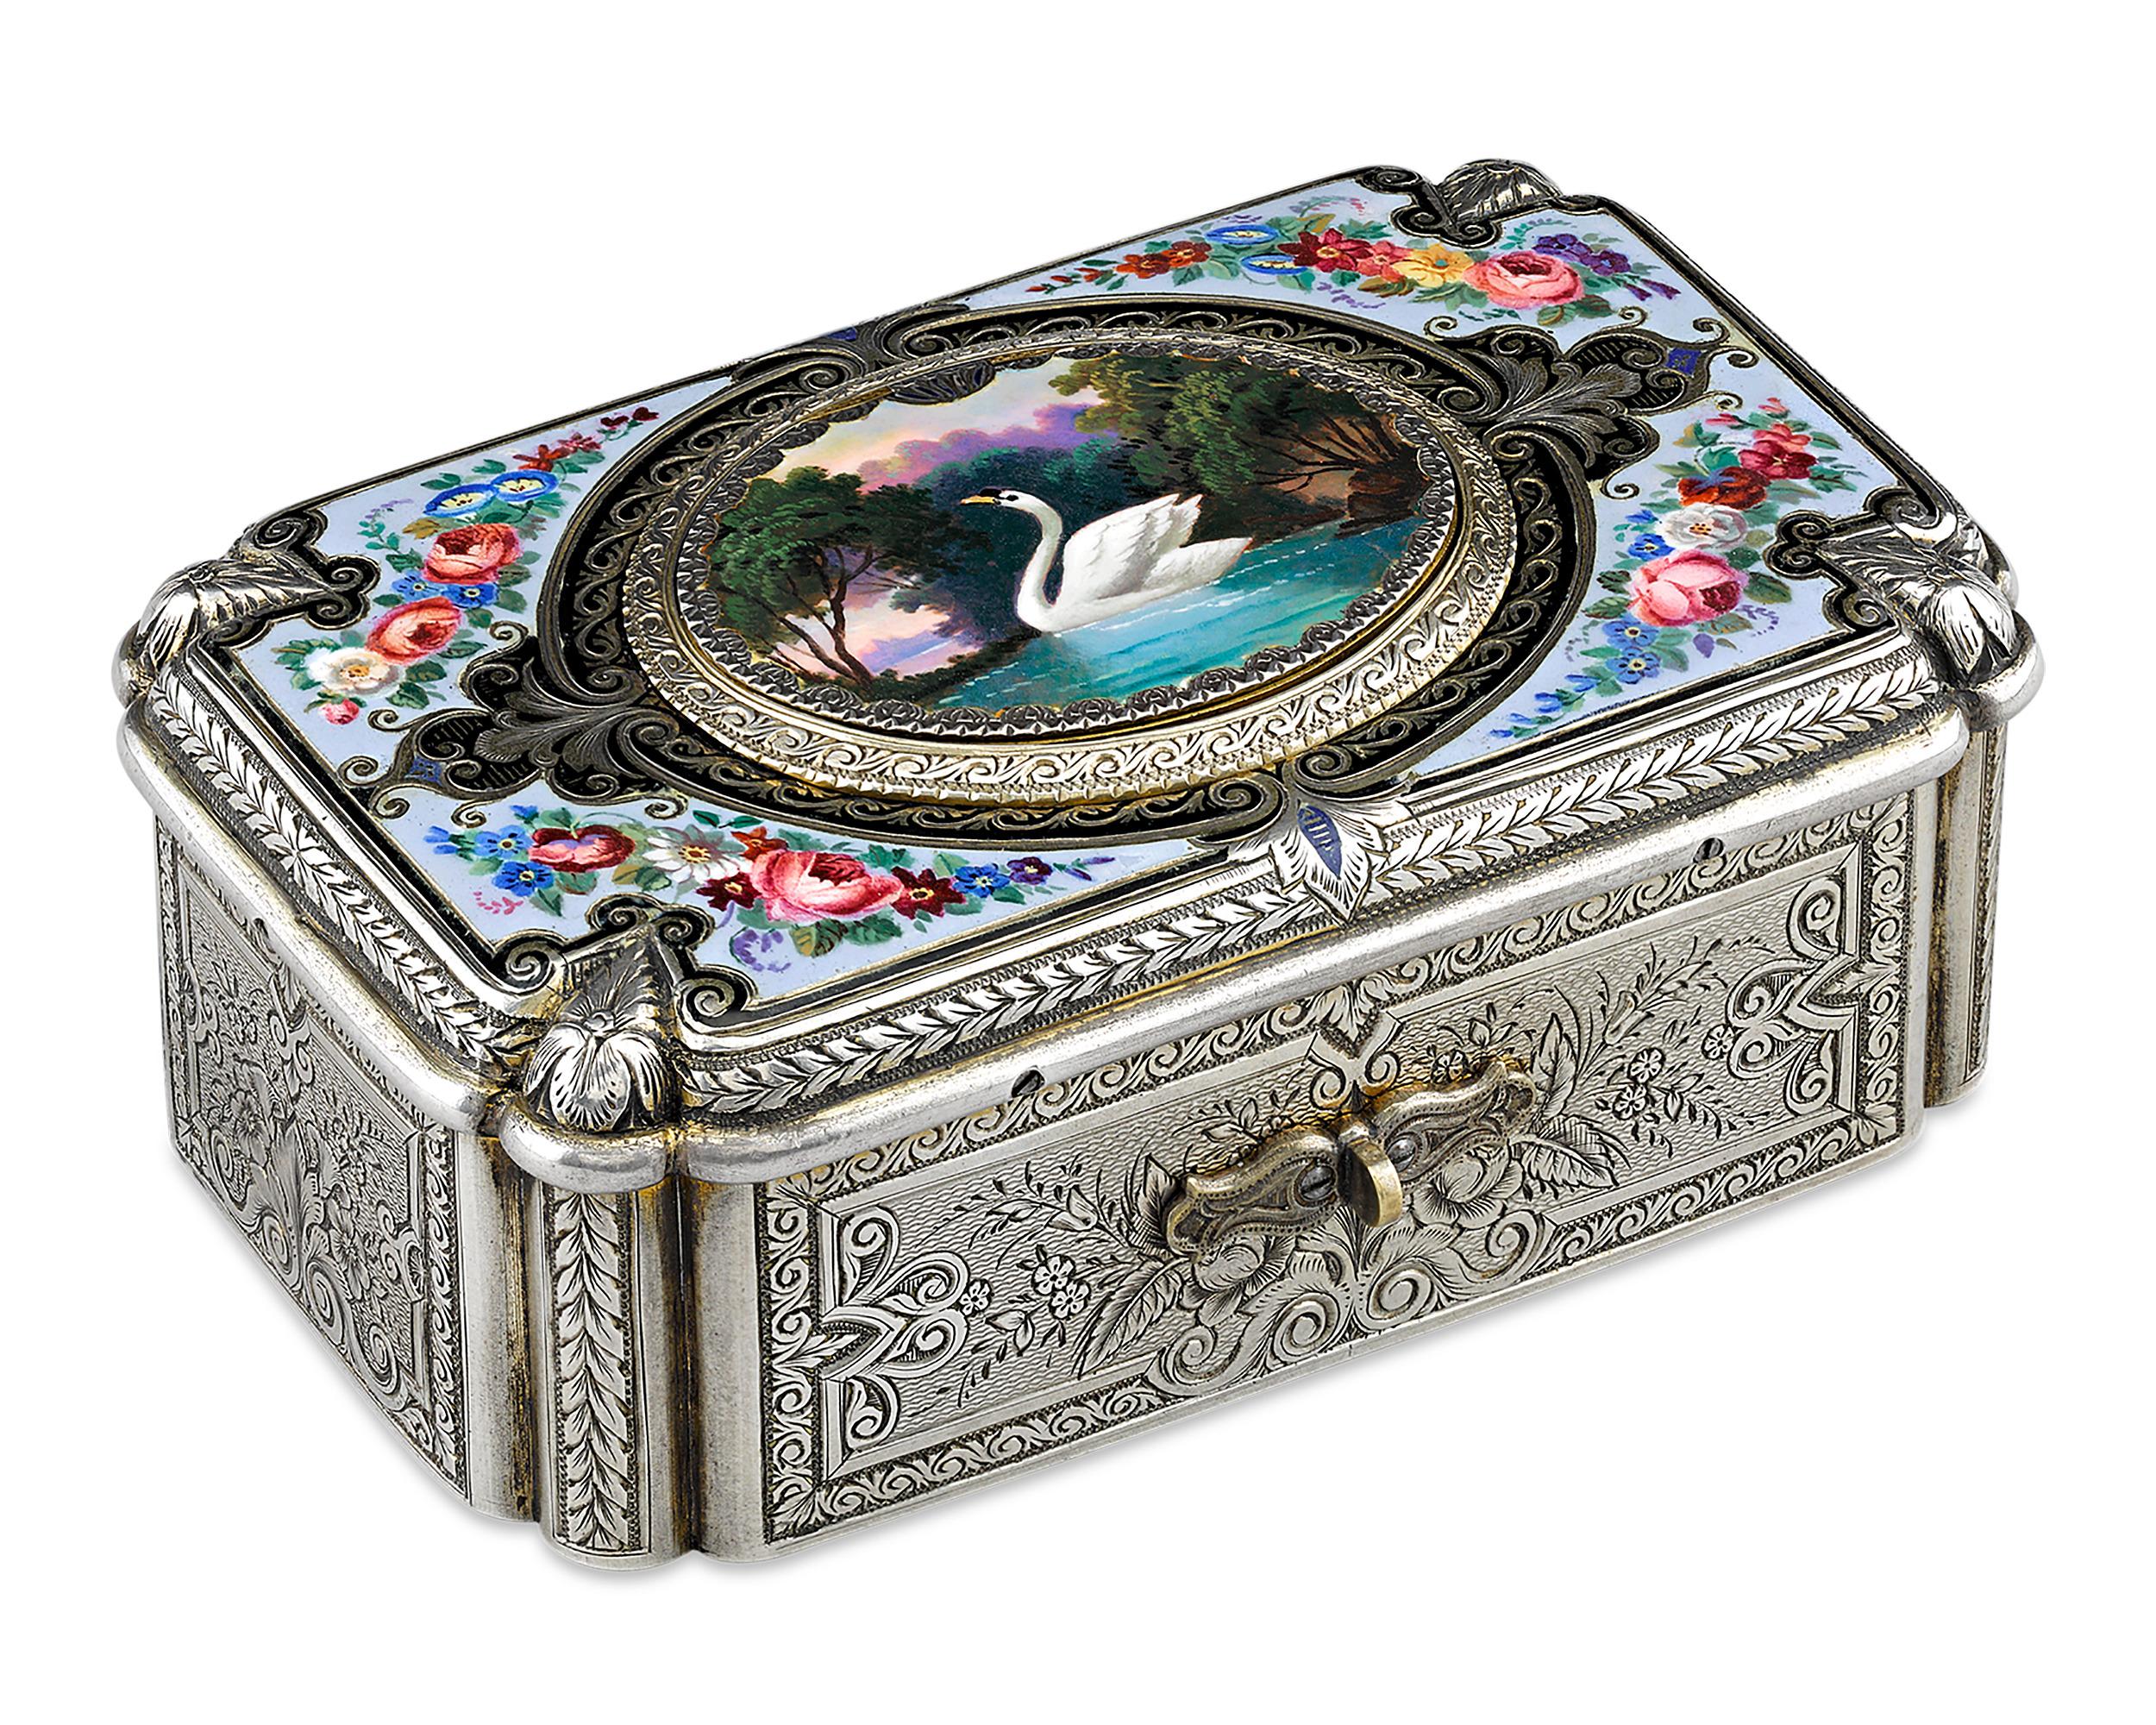 This extremely rare, early Swiss fusée singing bird box by the renowned Charles Bruguier combines exquisite artistry with outstanding mechanical craftsmanship. The earliest bird boxes were fusée, or chain driven, and are famed for playing longer and